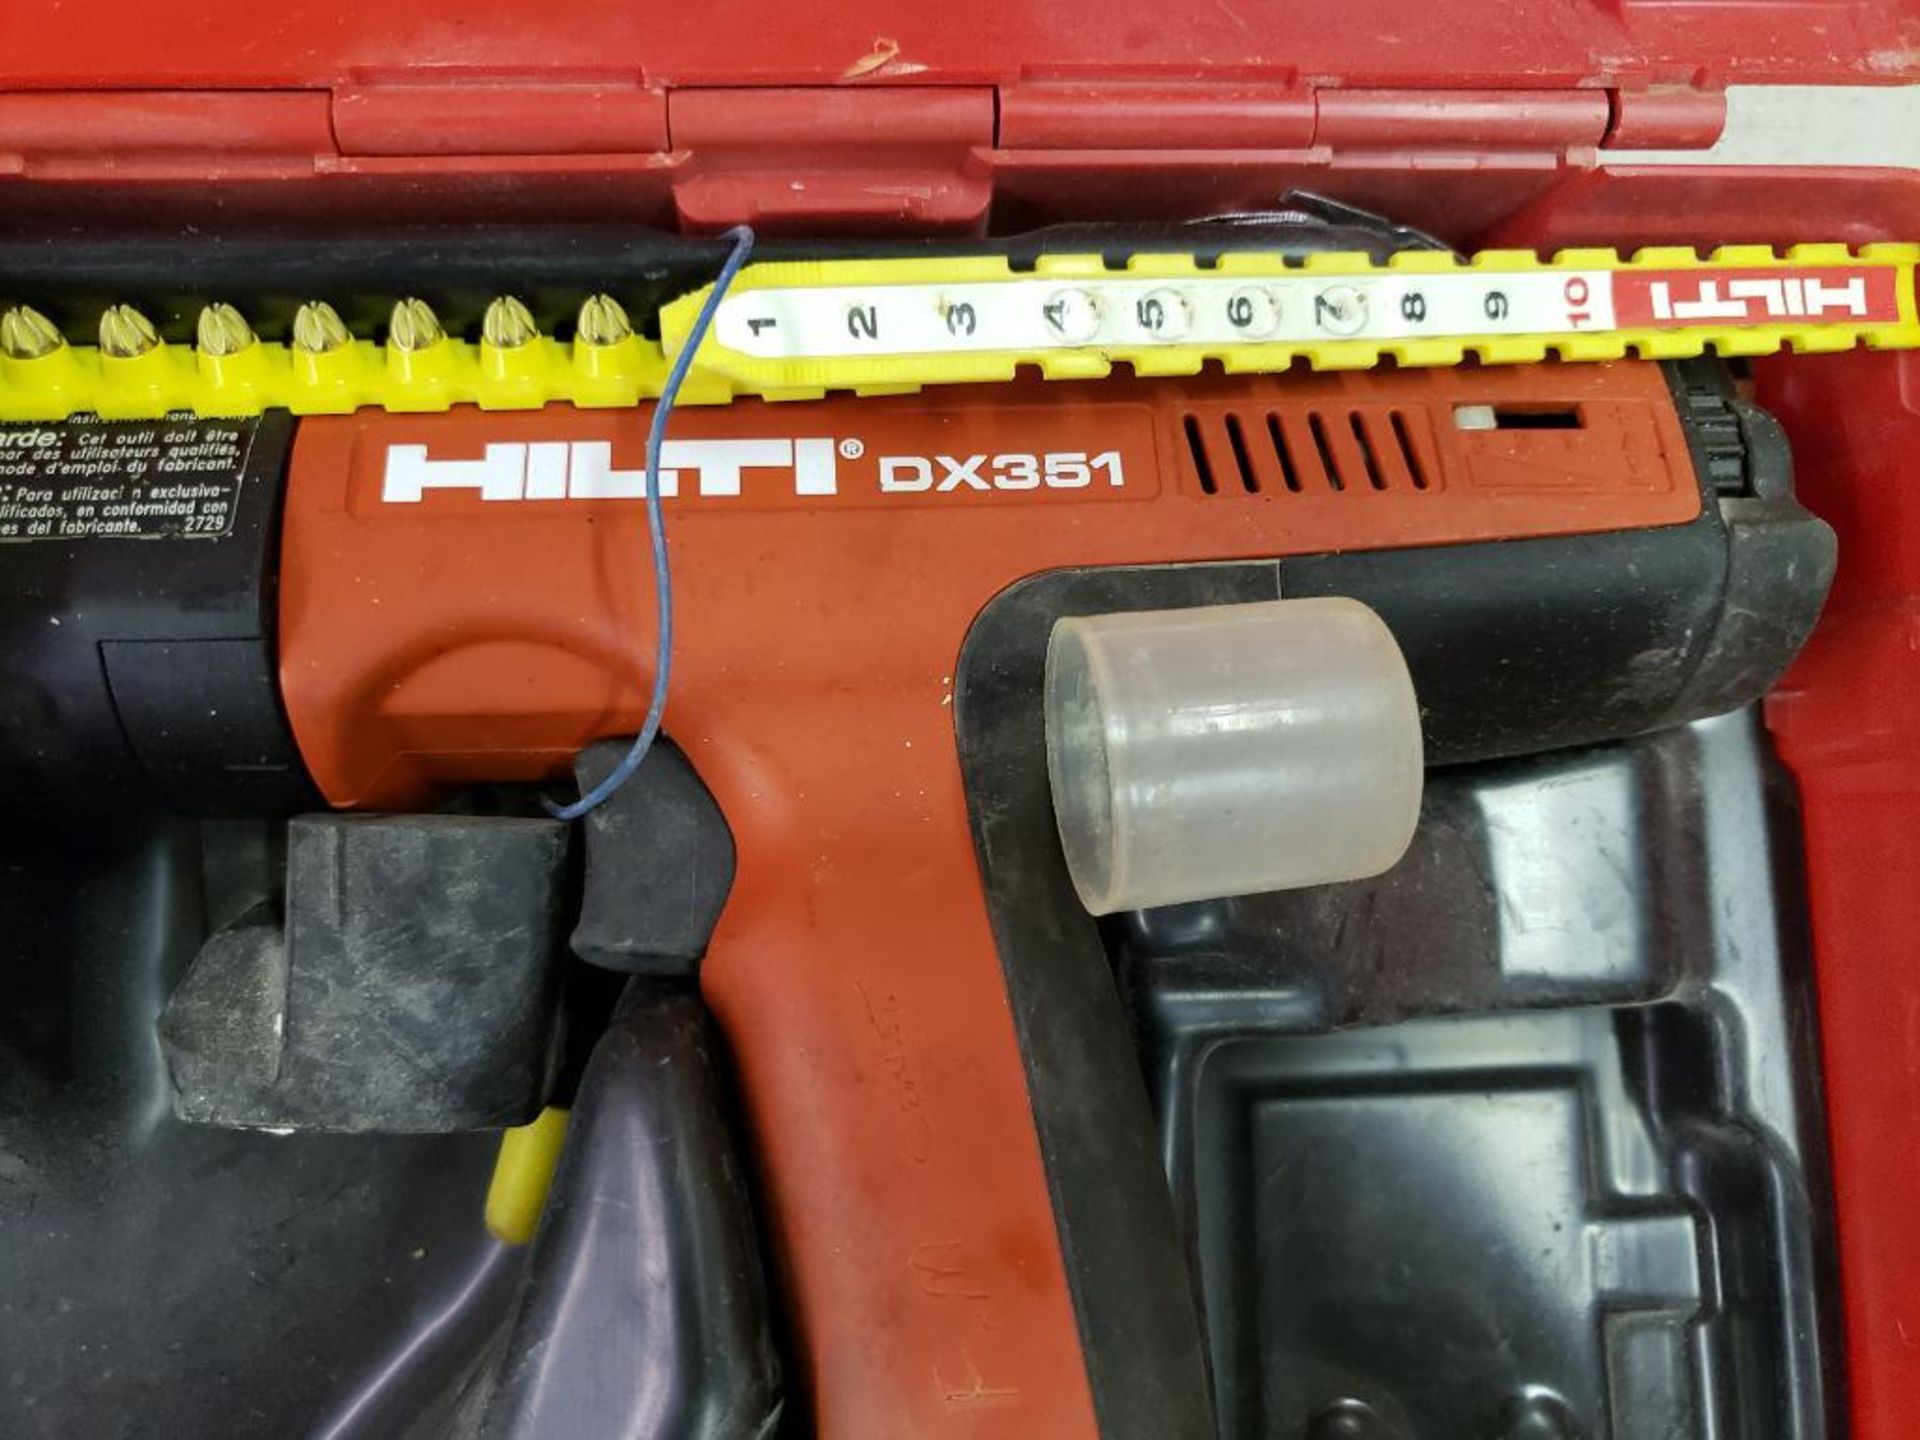 Hilti DX351 powder actuated tool. - Image 5 of 8